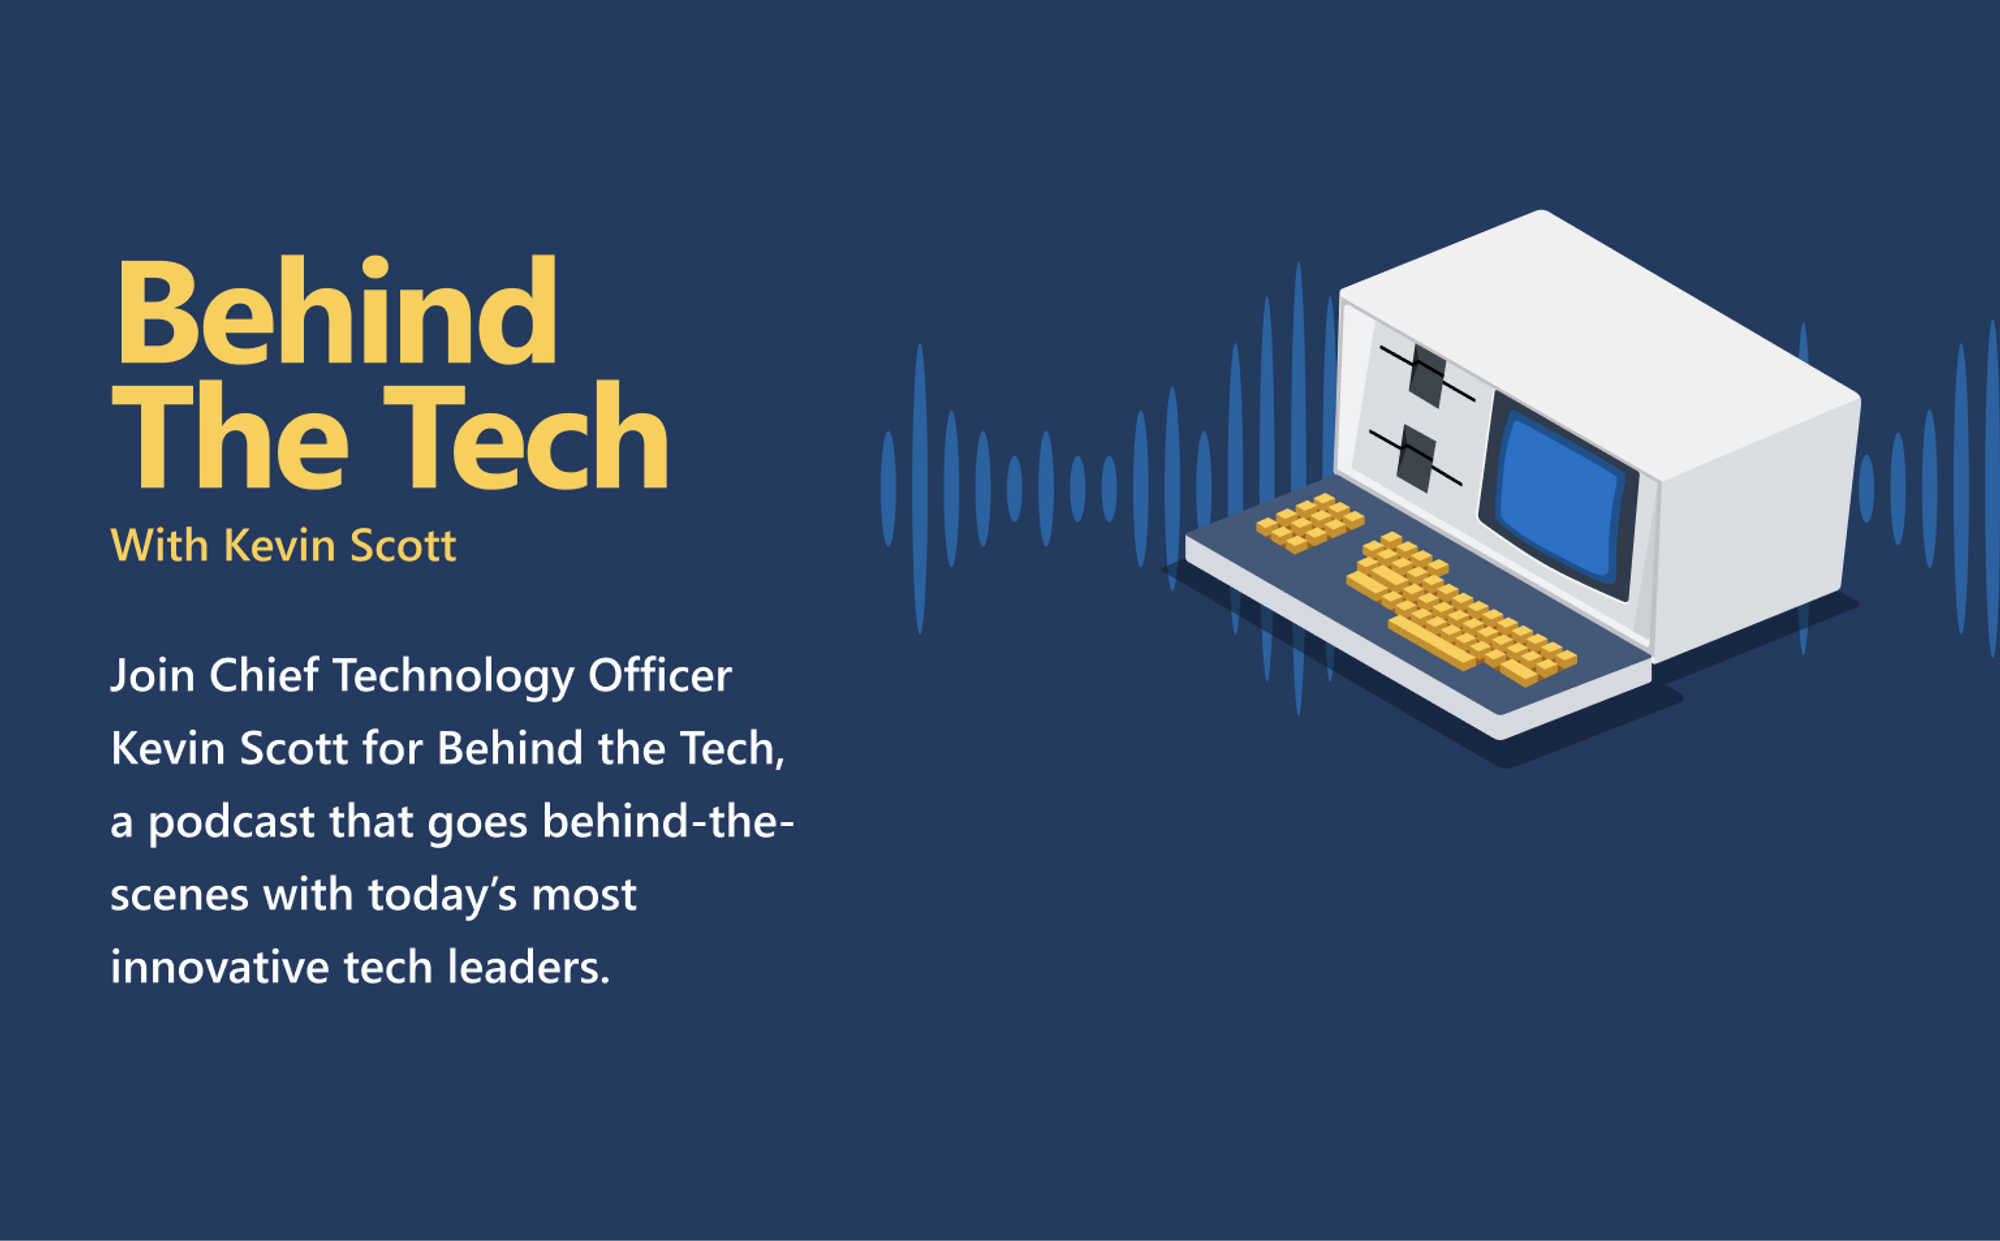 Behind the Tech Podcast with Kevin Scott - Microsoft